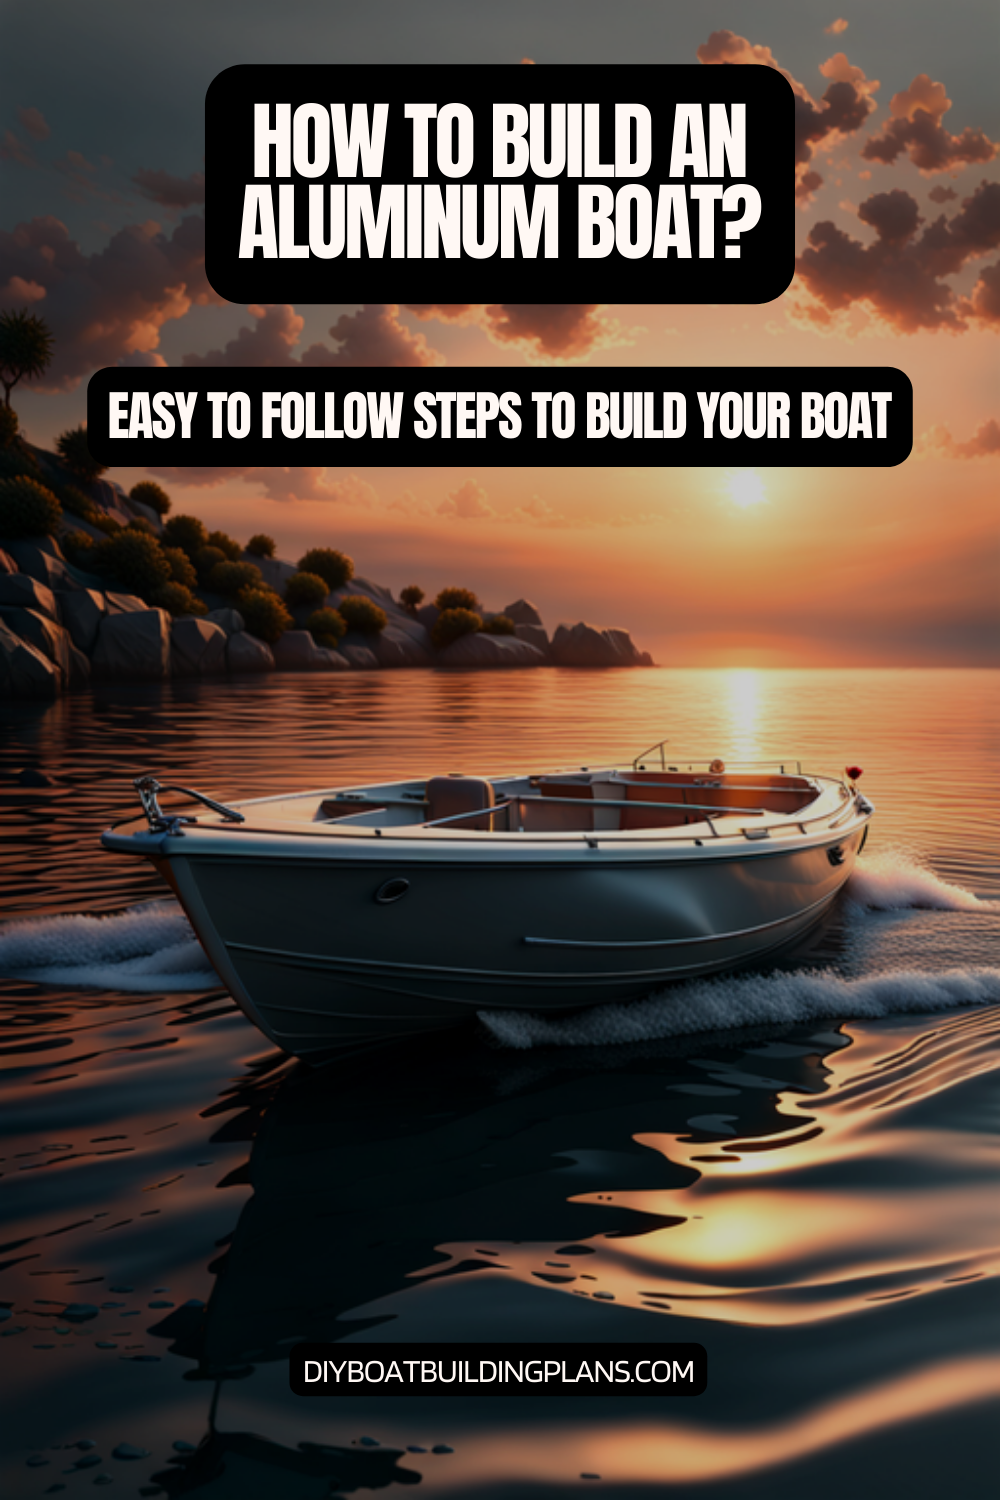 How To Build an Aluminum Boat